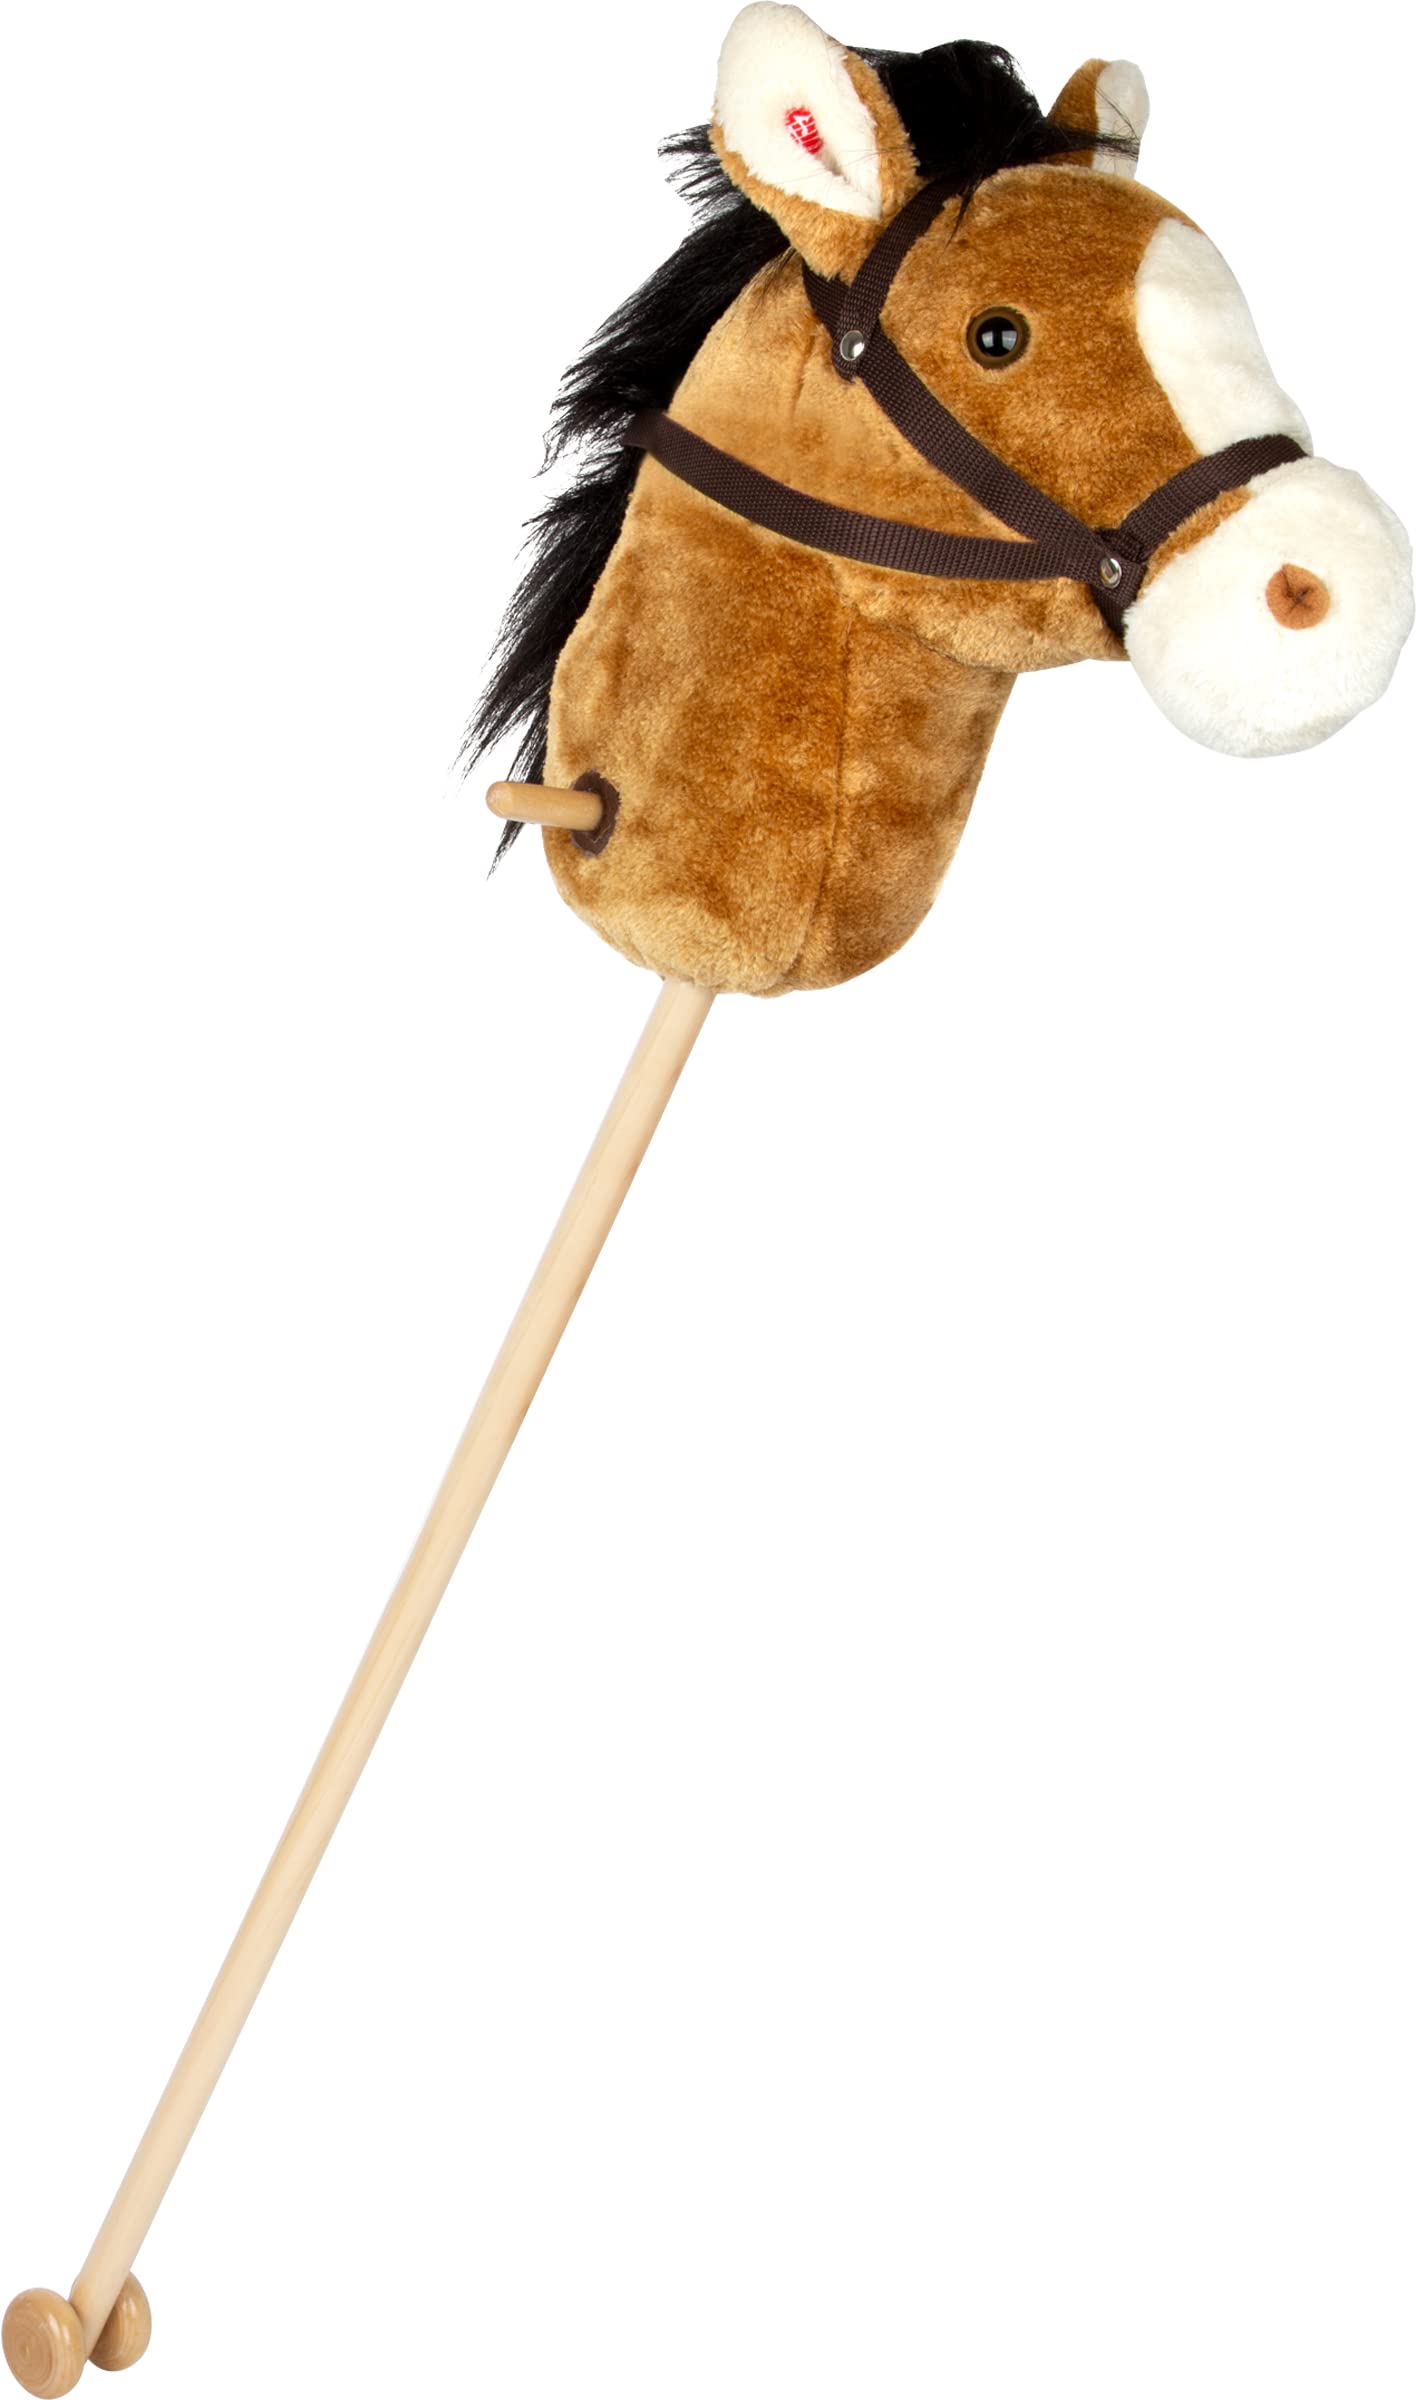 Small Foot Nico 11718 Wooden and Plush Horse with Halter, Reins, Handles and Sounds, from 3 Years Toys